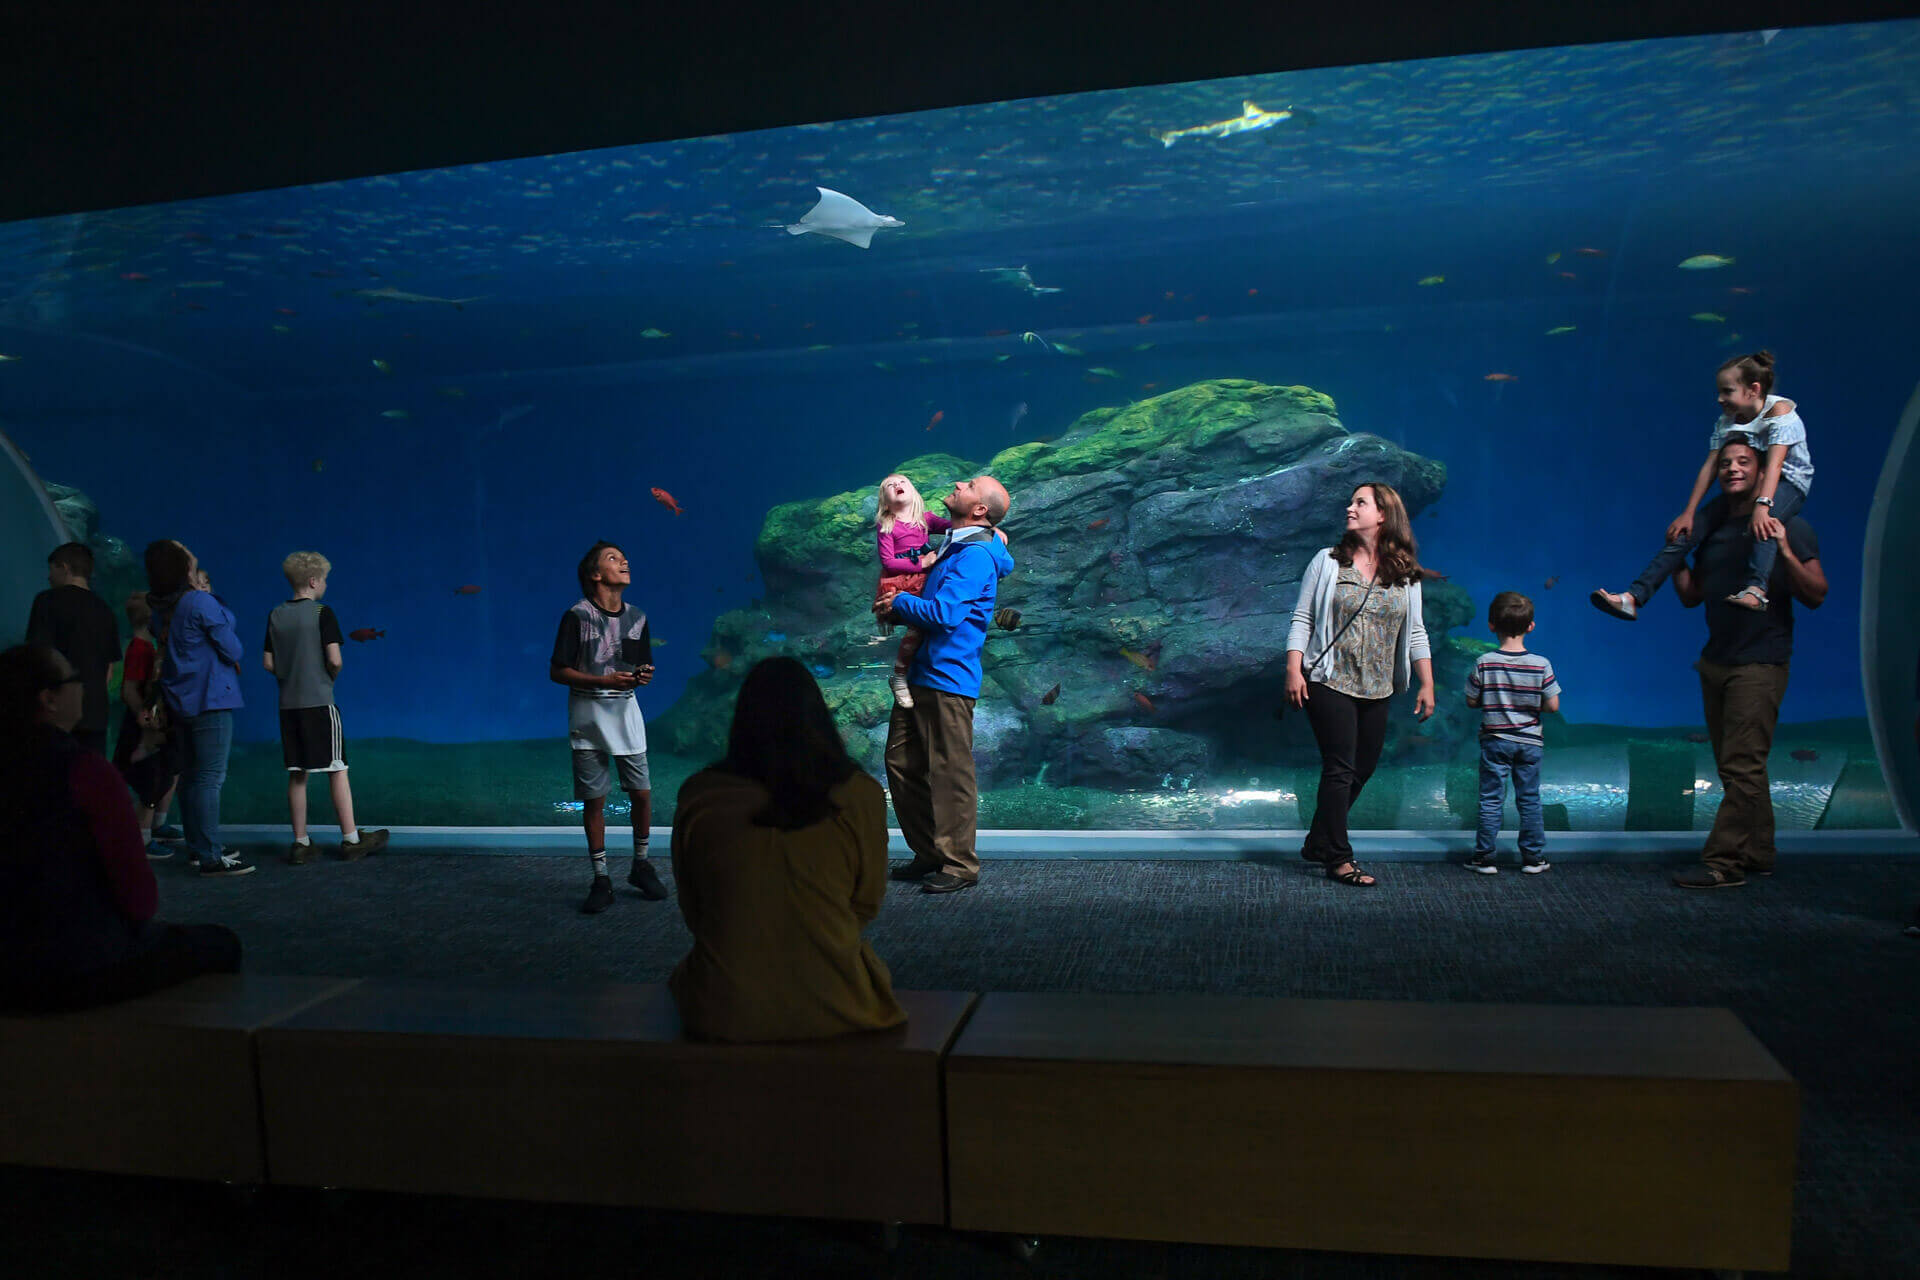 Children and adults view fish and other marine life inside a clear walkway at the Point Defiance Zoo & Aquarium